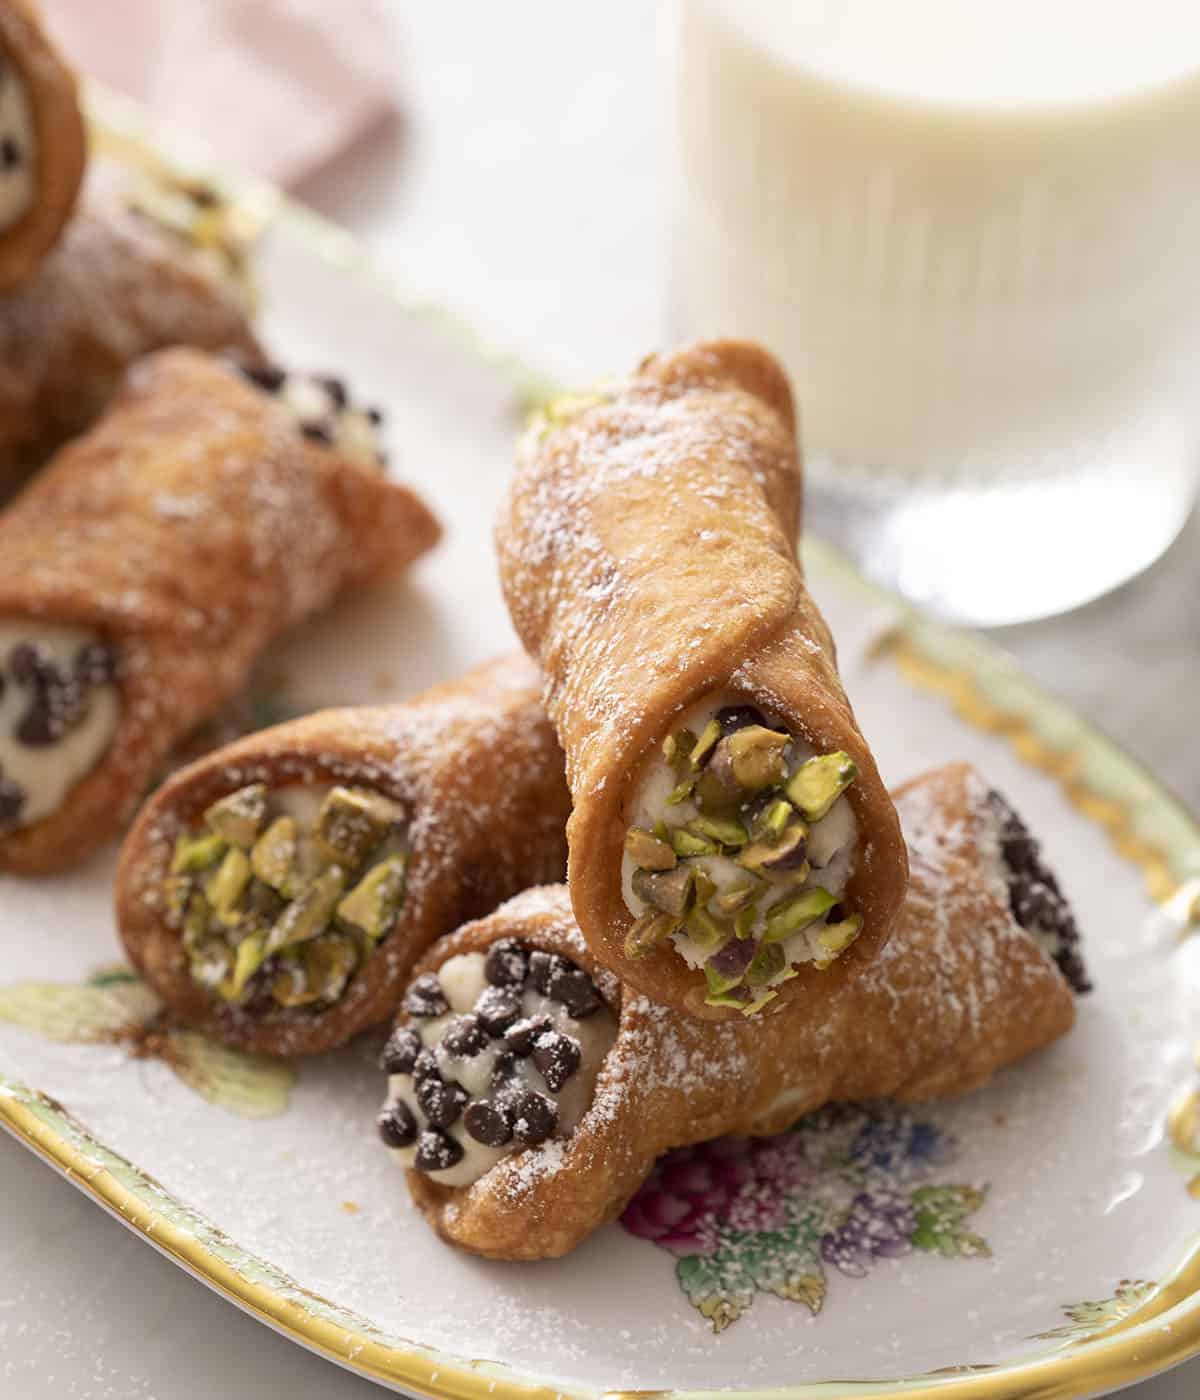 Cannoli with pistachios and chocolate chips next to a glass of milk.